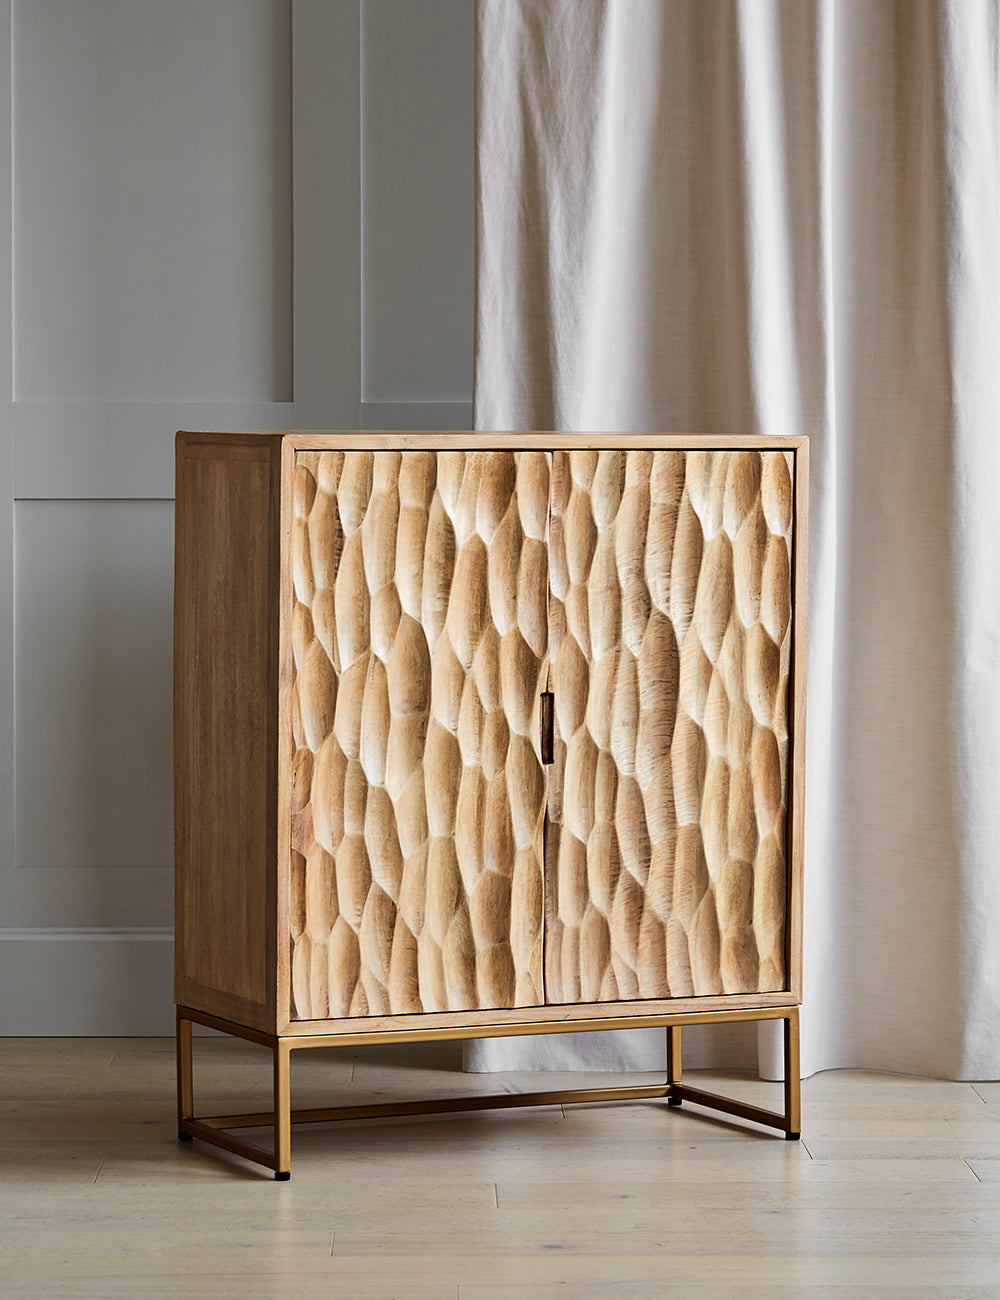 Mango Wood and Brass Textured Cabinet closed